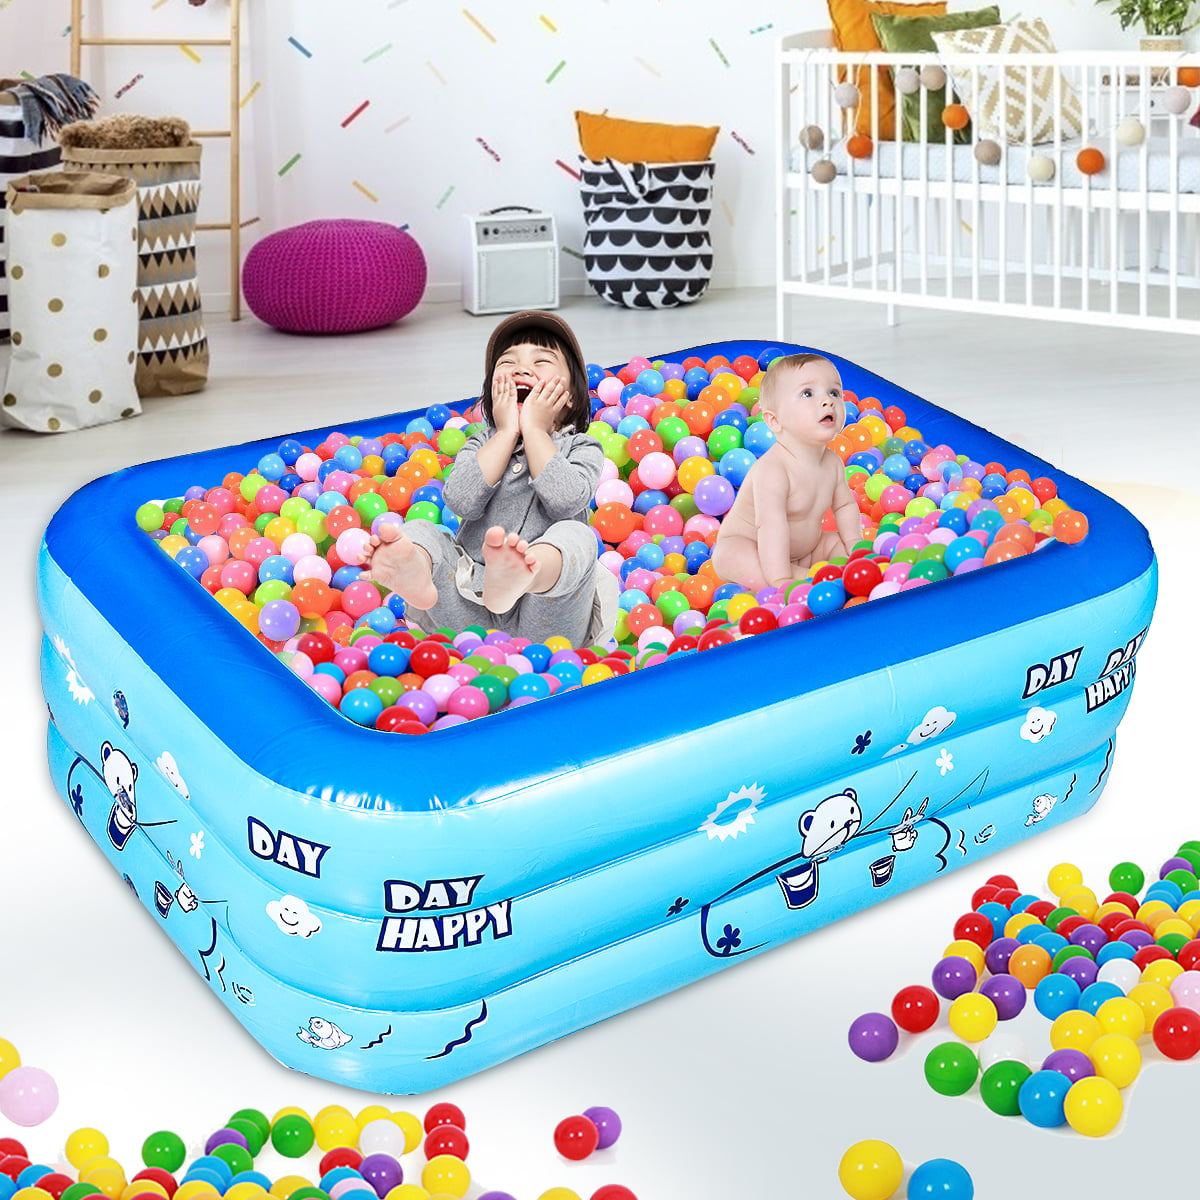 smileyshy Baby Inflatable Swimming Pool Inflatable Bathtub Baby Thicker Swimming Pool Family Infant Childrens Round Paddling Foldable Pool Ocean Ball Pools Paddling Pool Kids Toy 